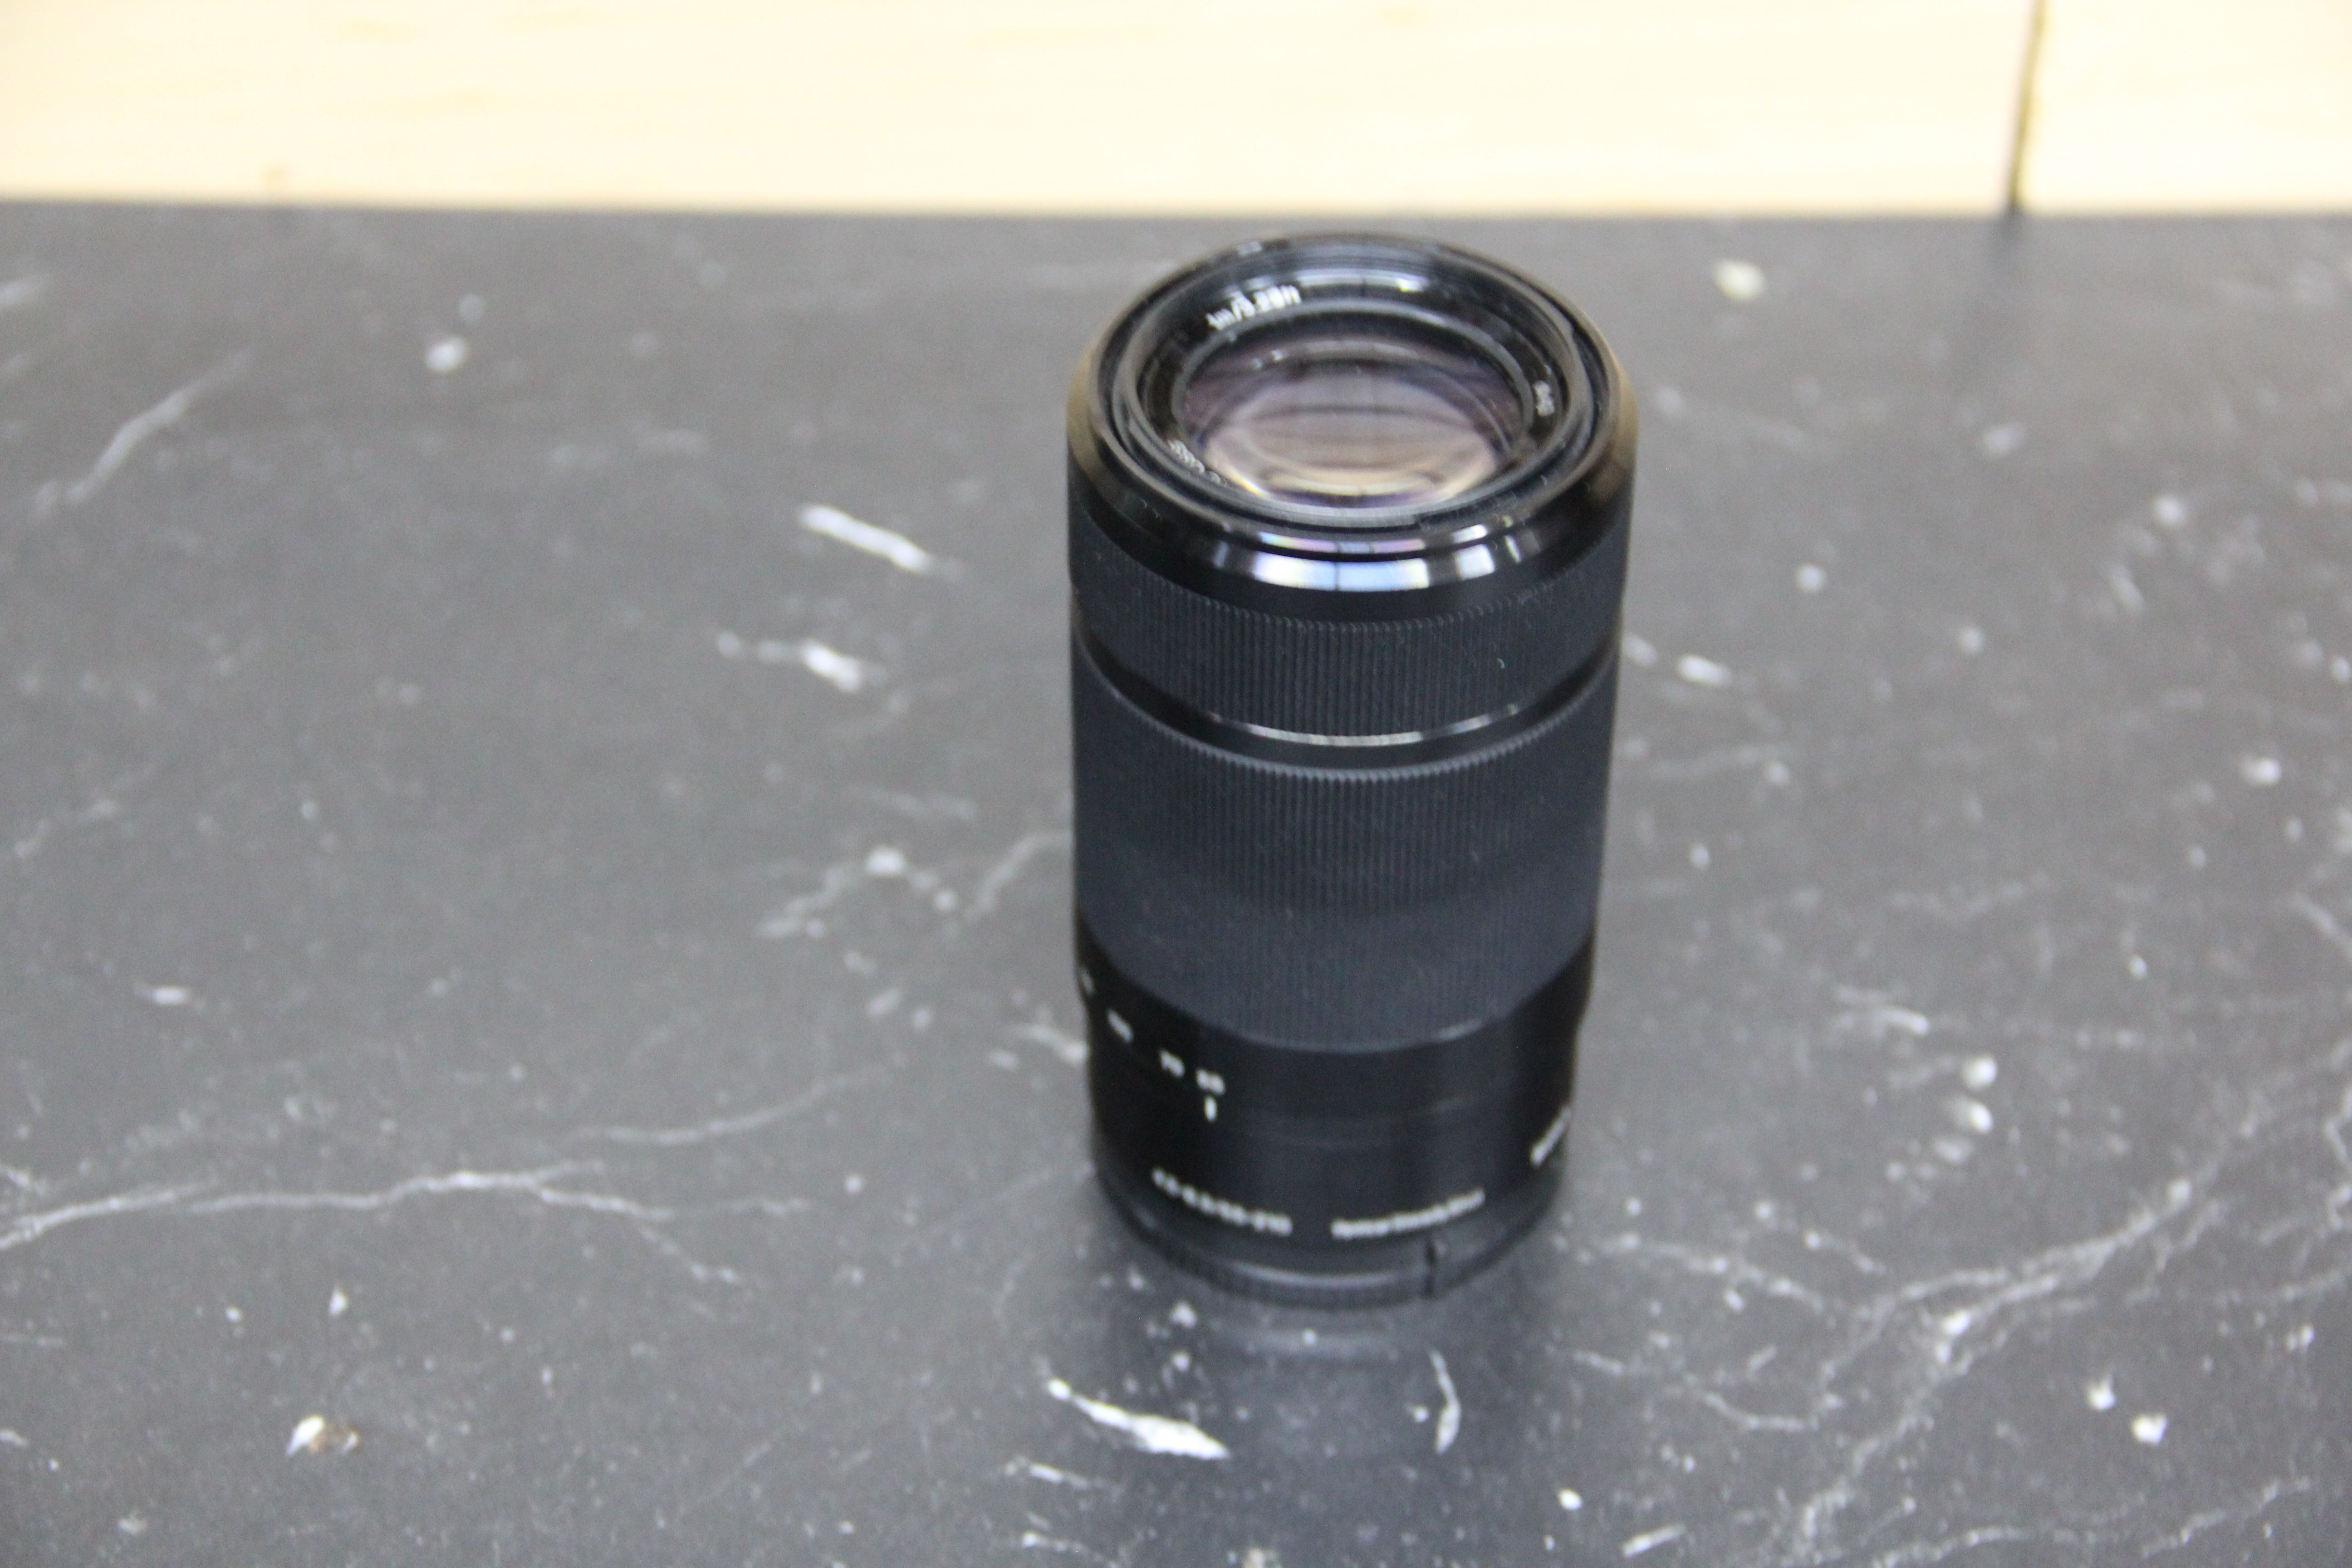 For sale is a Sony SEL55210 - 55-210mm Lens